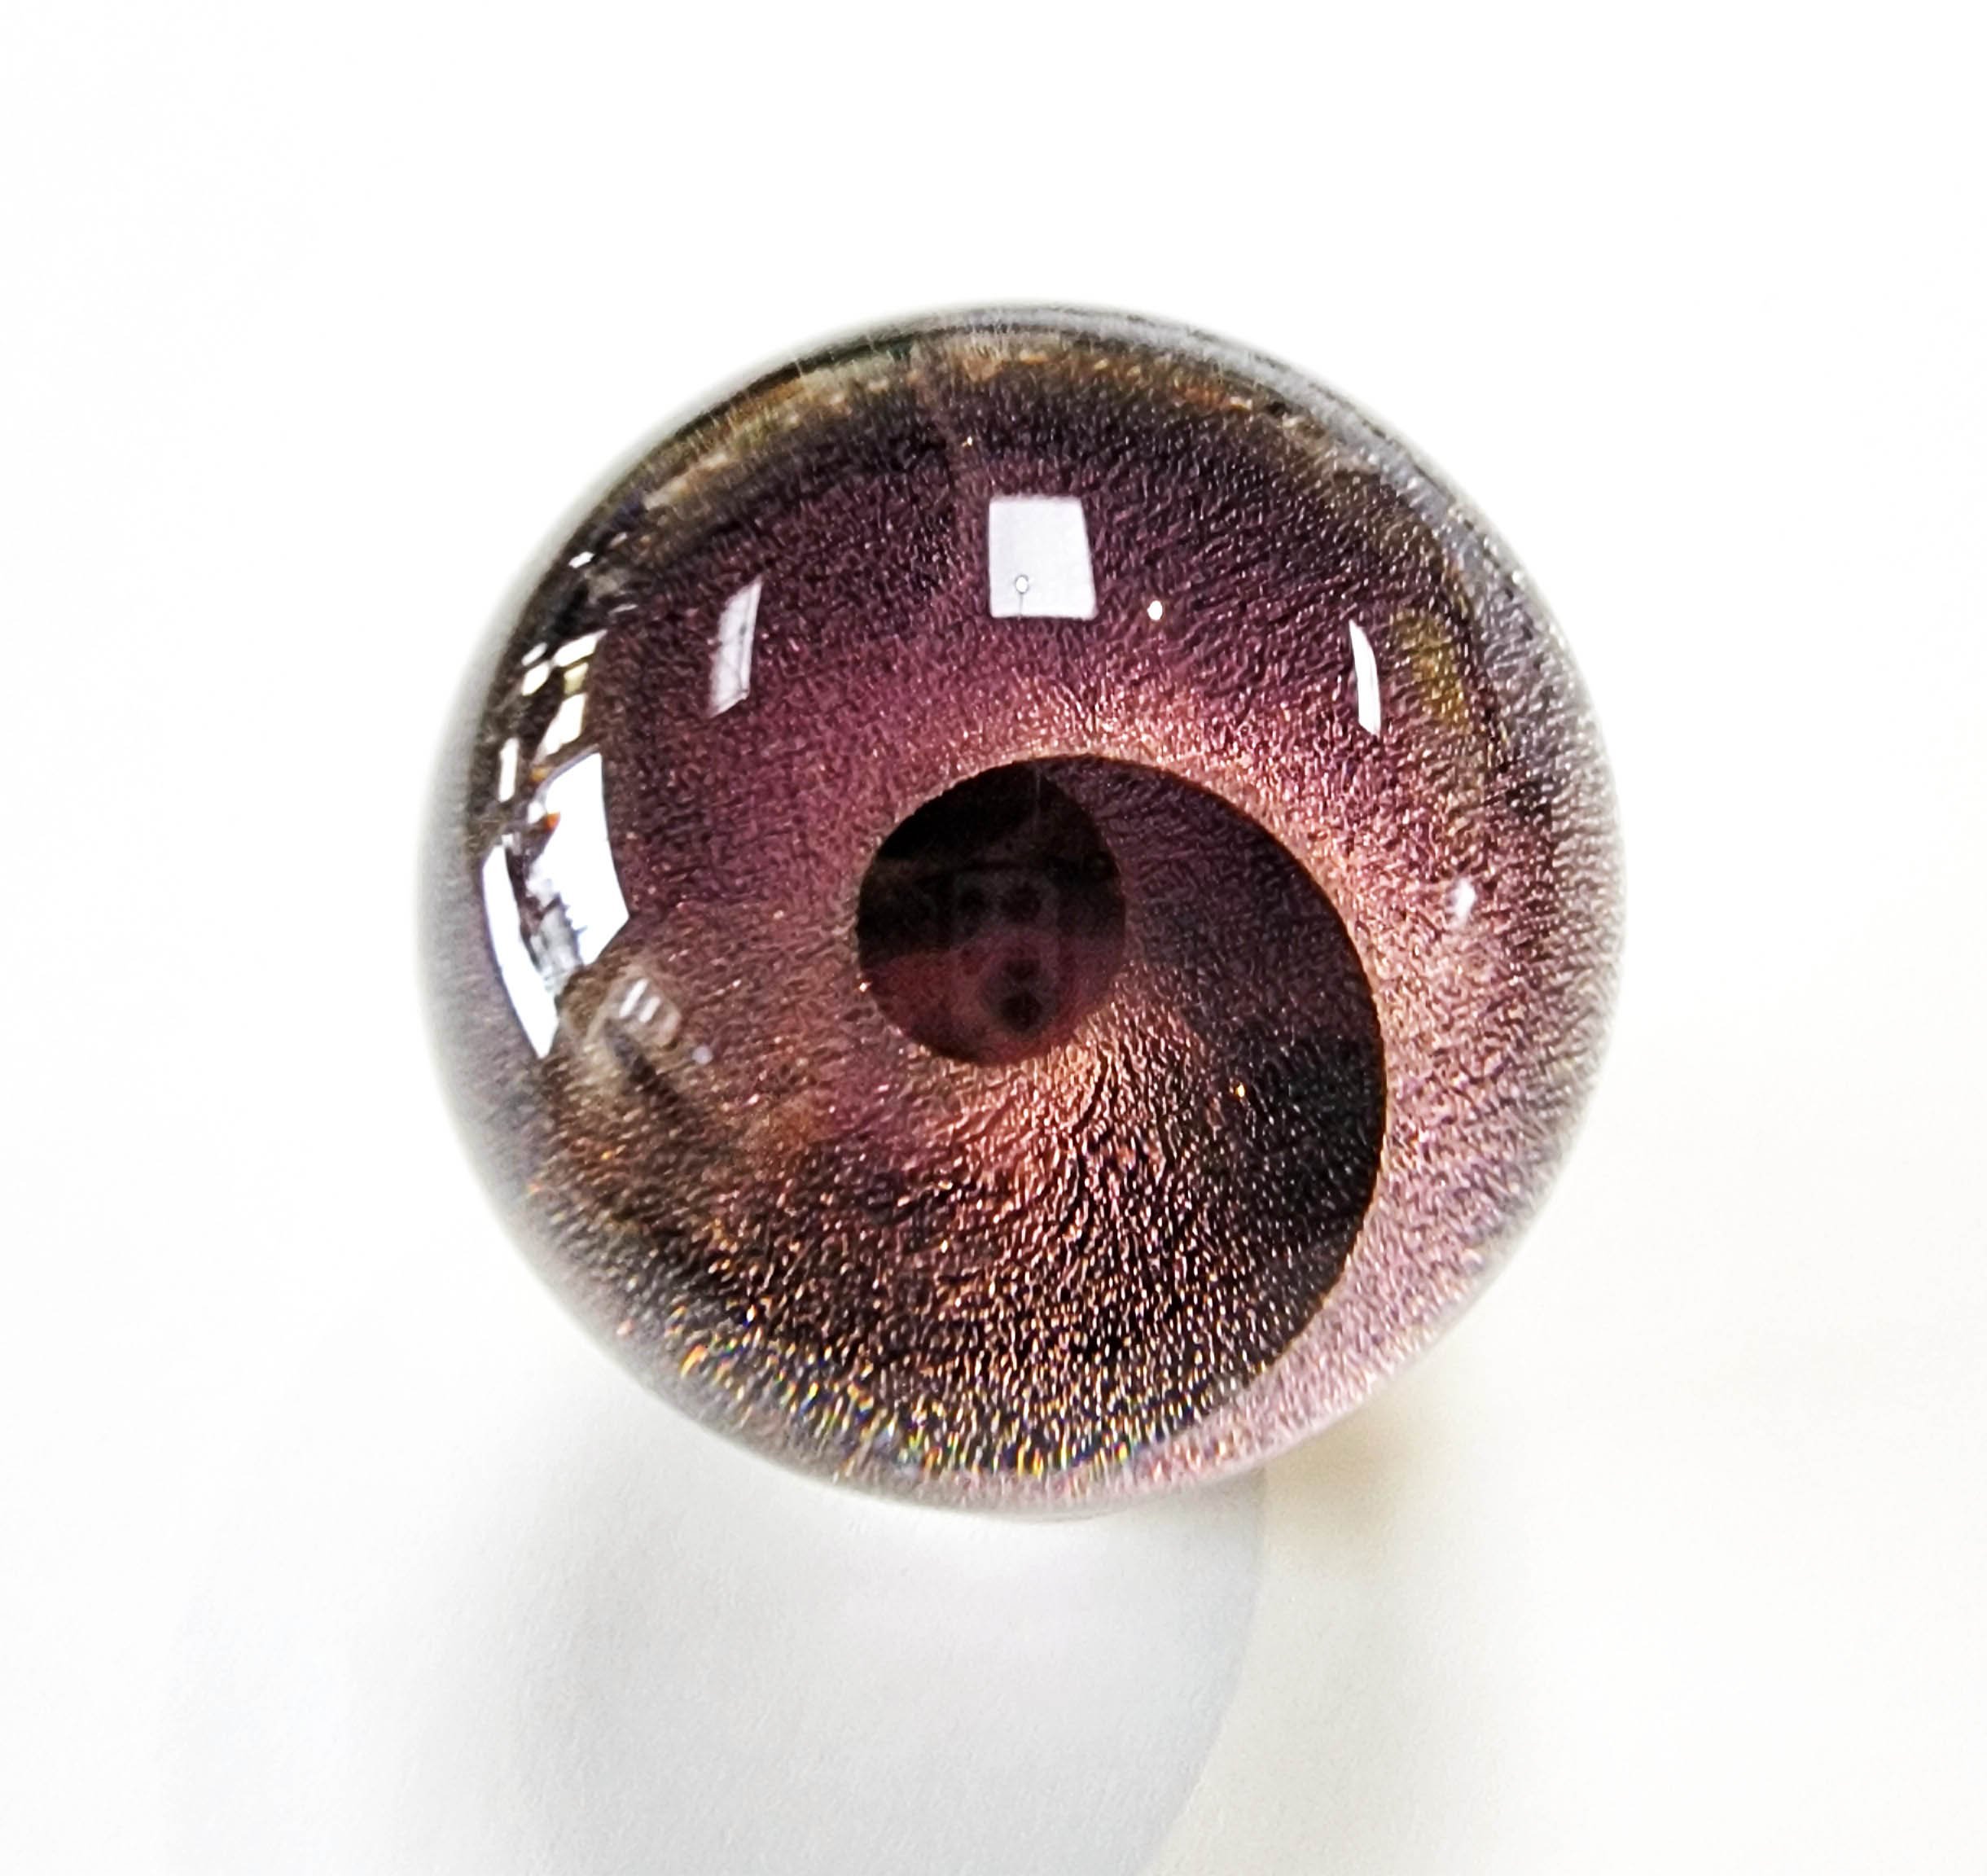 Joe Schlemmer: Dichroic Vortex Galaxy with Gold-Fumed Dot Backing   